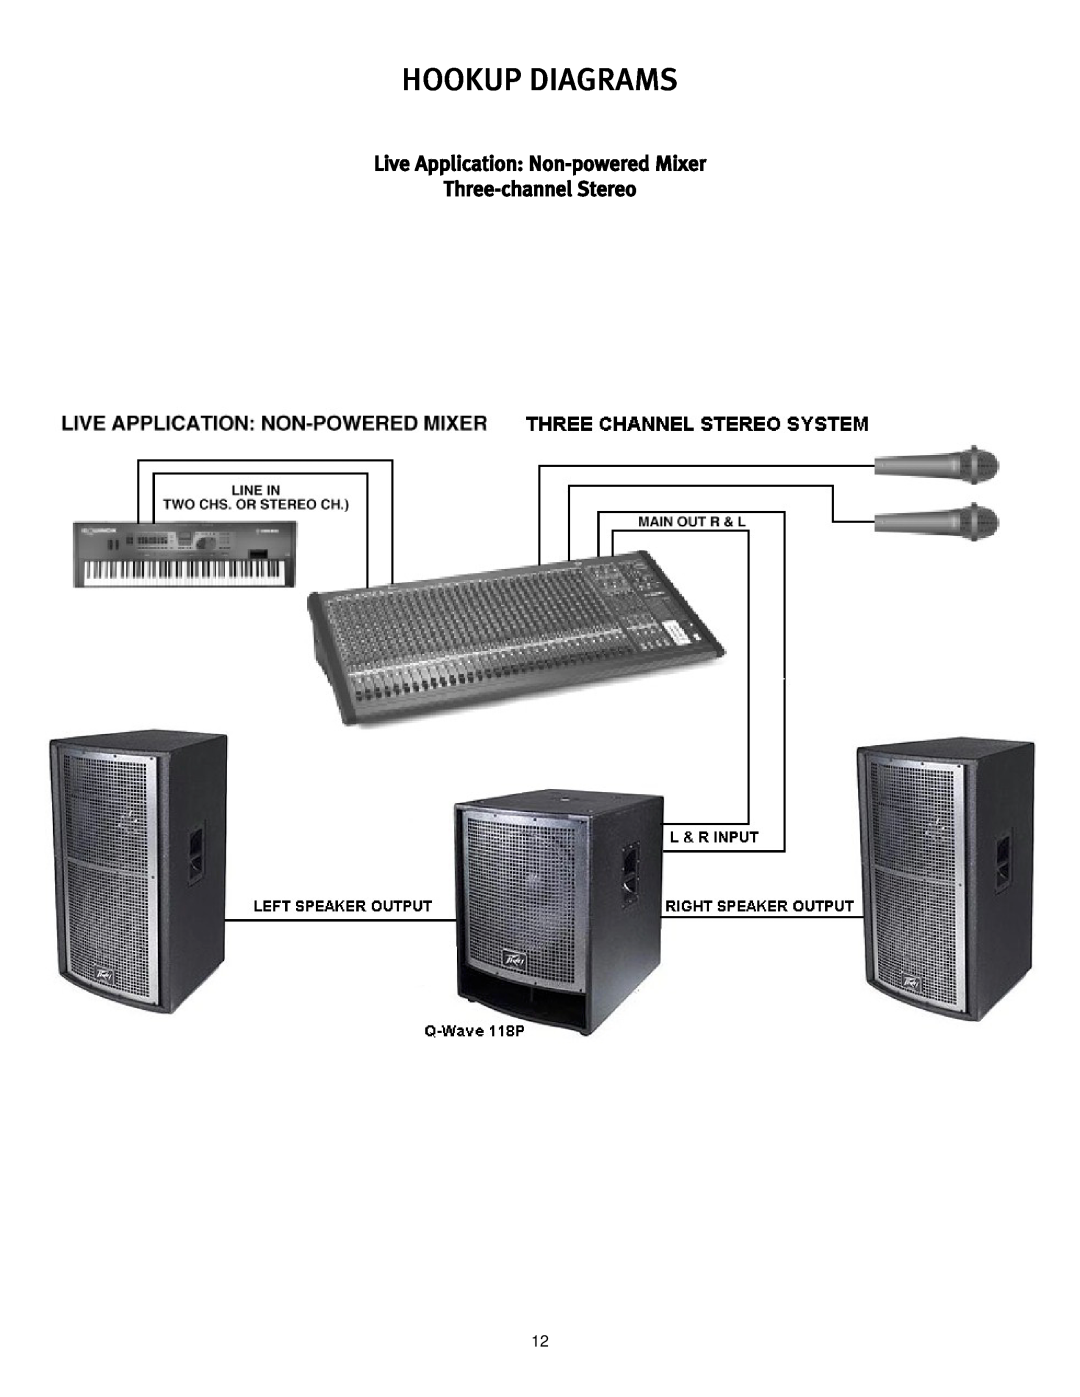 Peavey 118P manual Live Application Non-poweredMixer, Three-channelStereo, Hookup Diagrams 